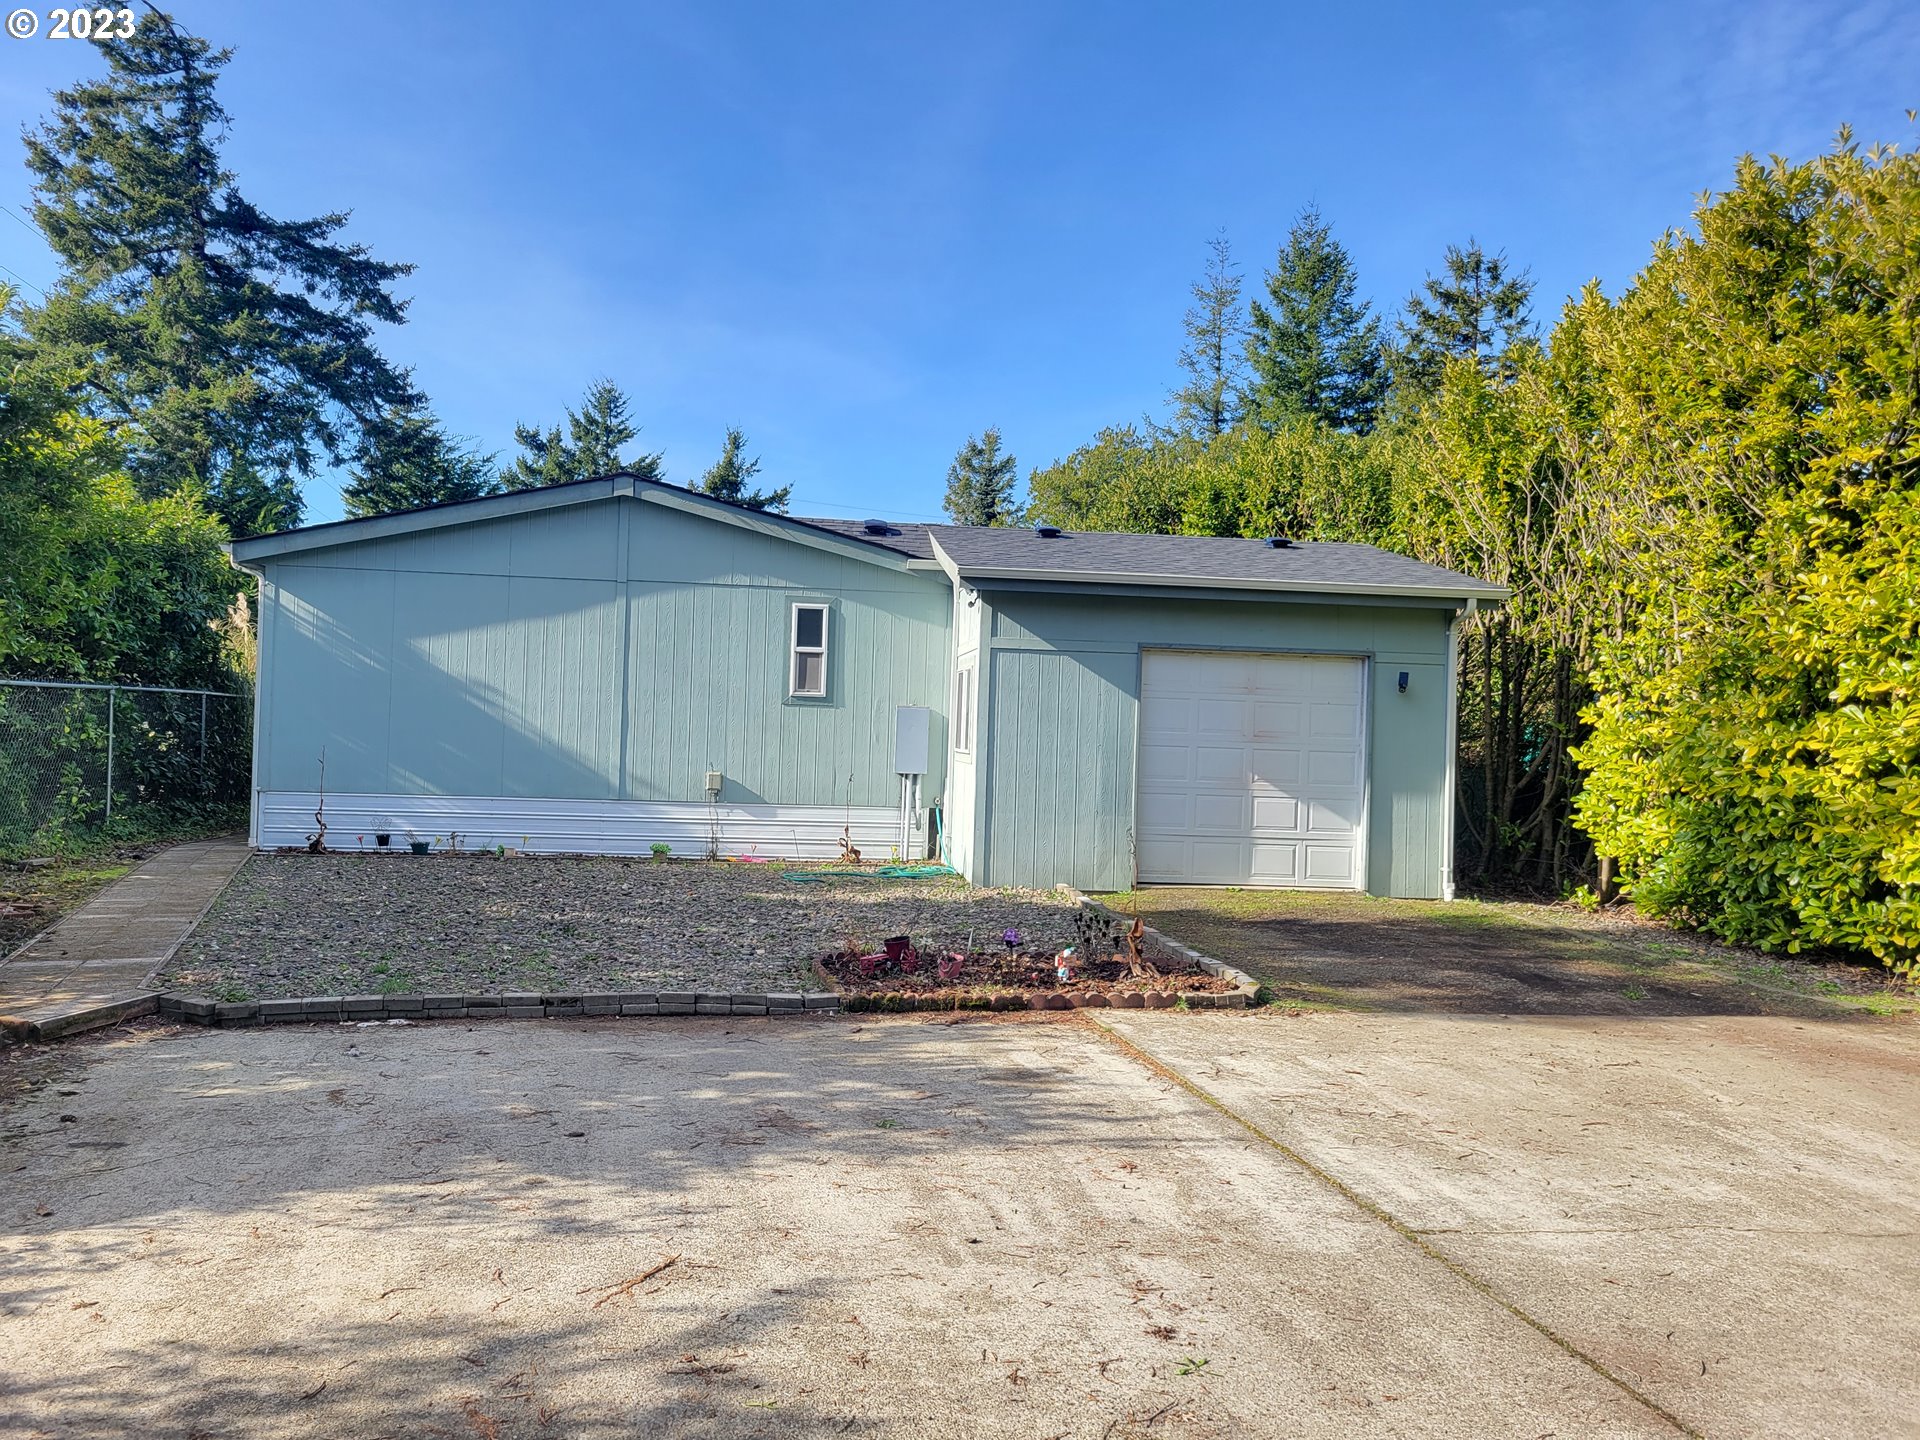 8 REDWOOD ST, Florence, OR 97439